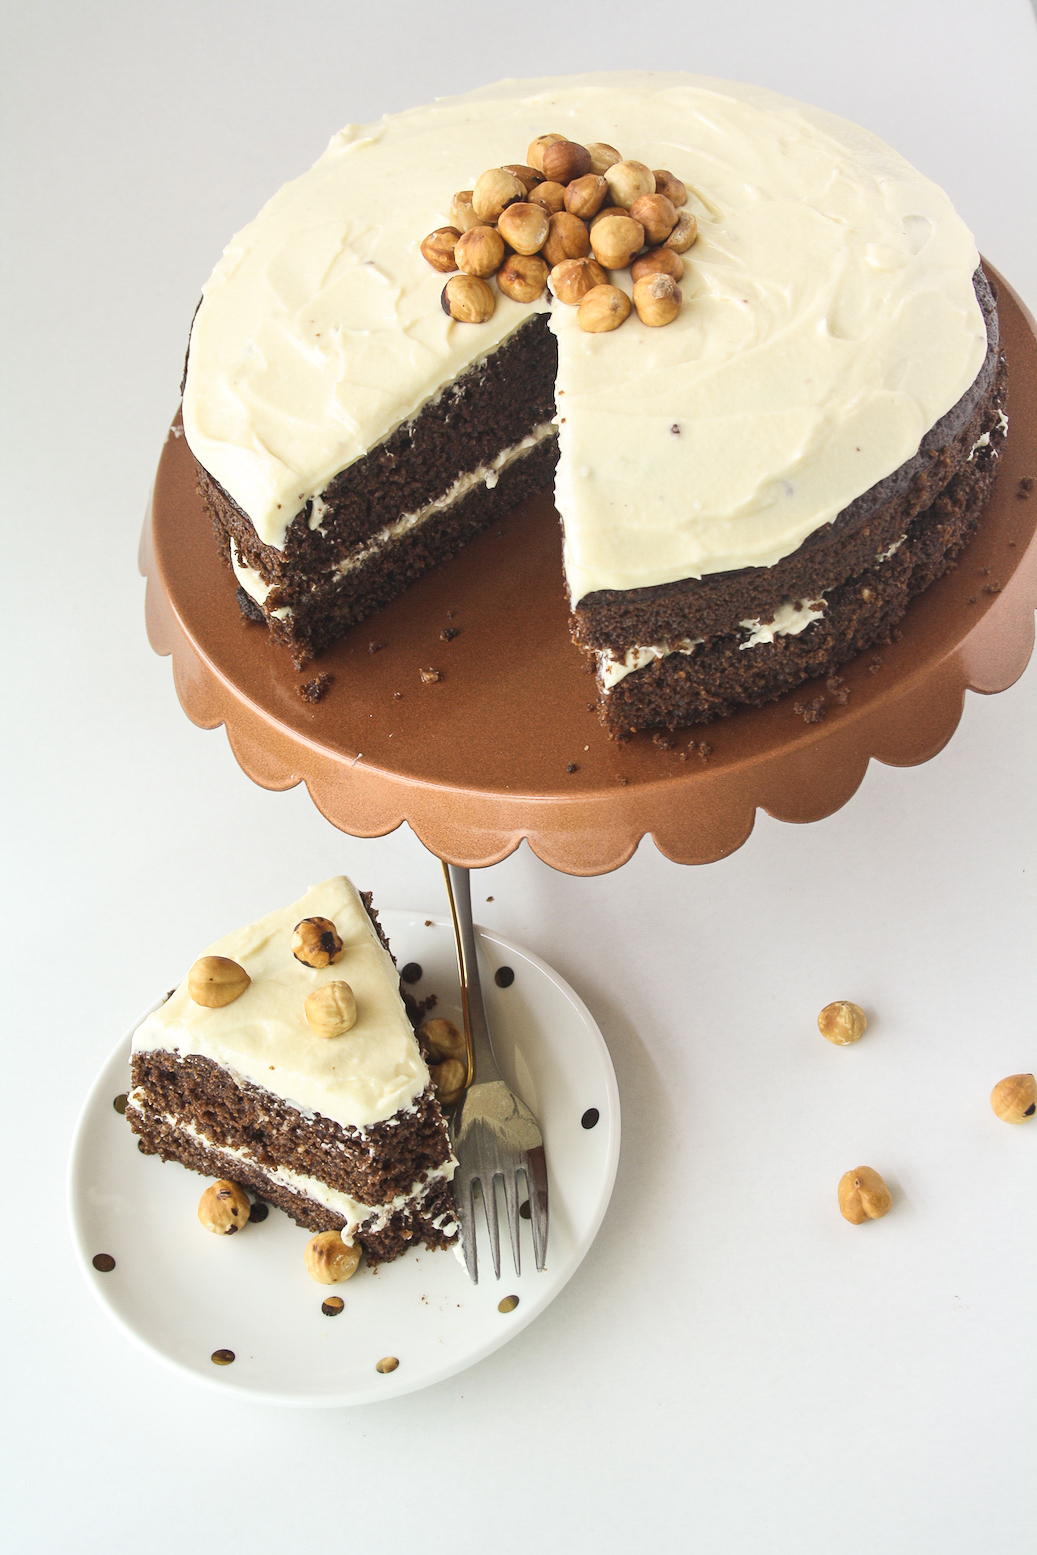 Moist chocolate cake filled with hazelnuts, layered with a hazelnut cream cheese frosting!